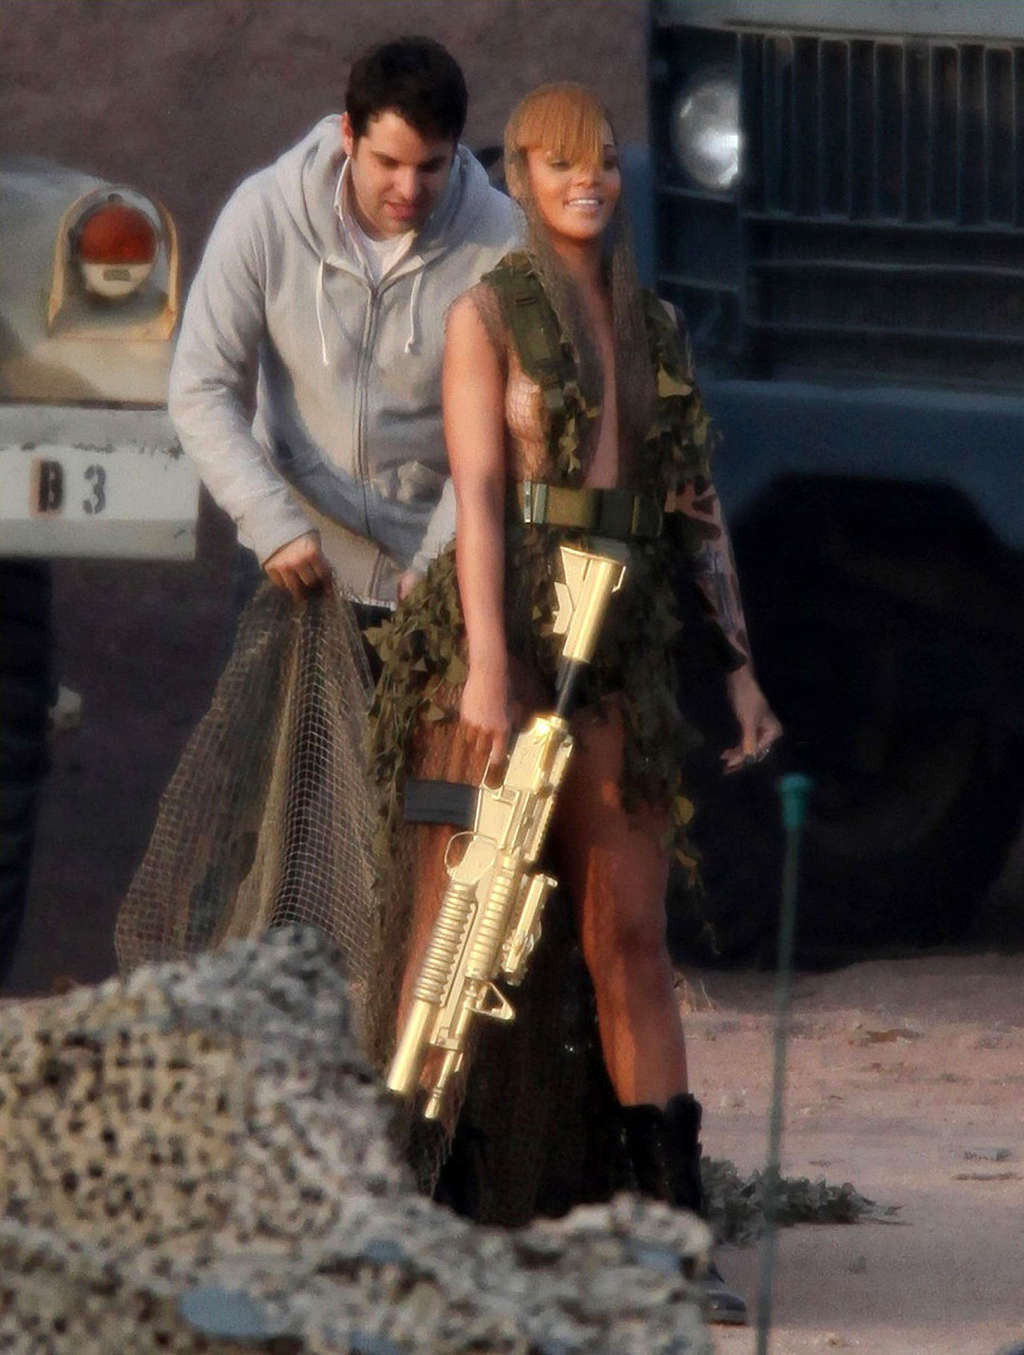 Rihanna nipple slip and exposing her nice big tits on video set in military styl #75371058